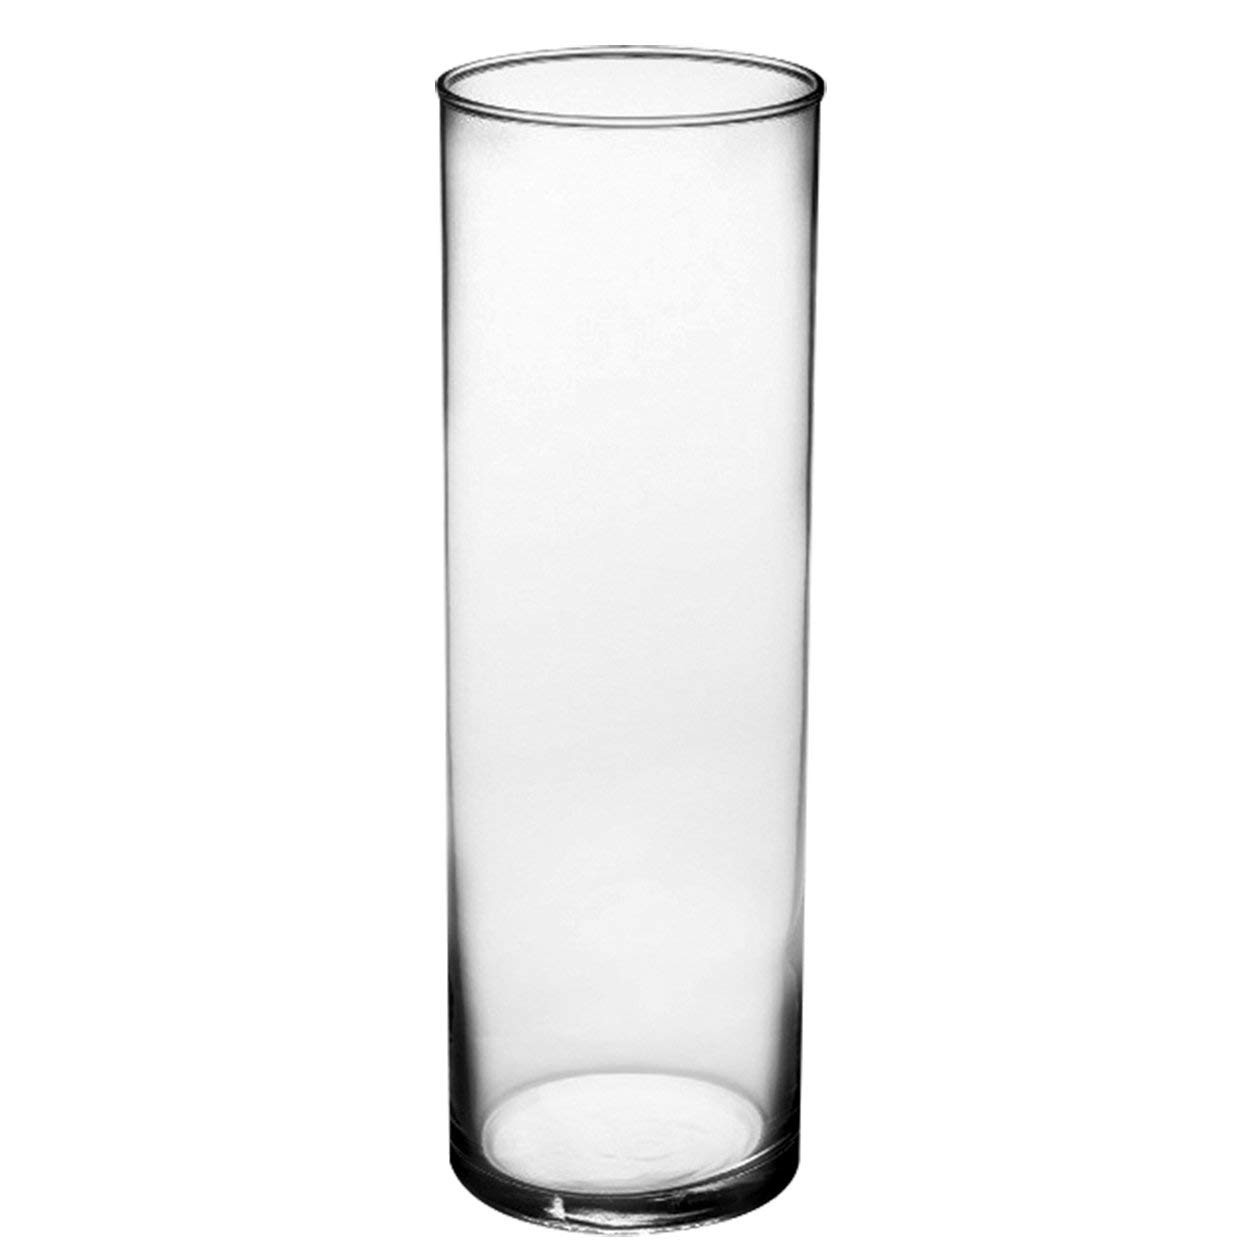 28 Lovely Extra Tall Glass Vases 2024 free download extra tall glass vases of amazon com syndicate sales 3 1 2 x 10 1 2 cylinder vase clear for amazon com syndicate sales 3 1 2 x 10 1 2 cylinder vase clear planters garden outdoor